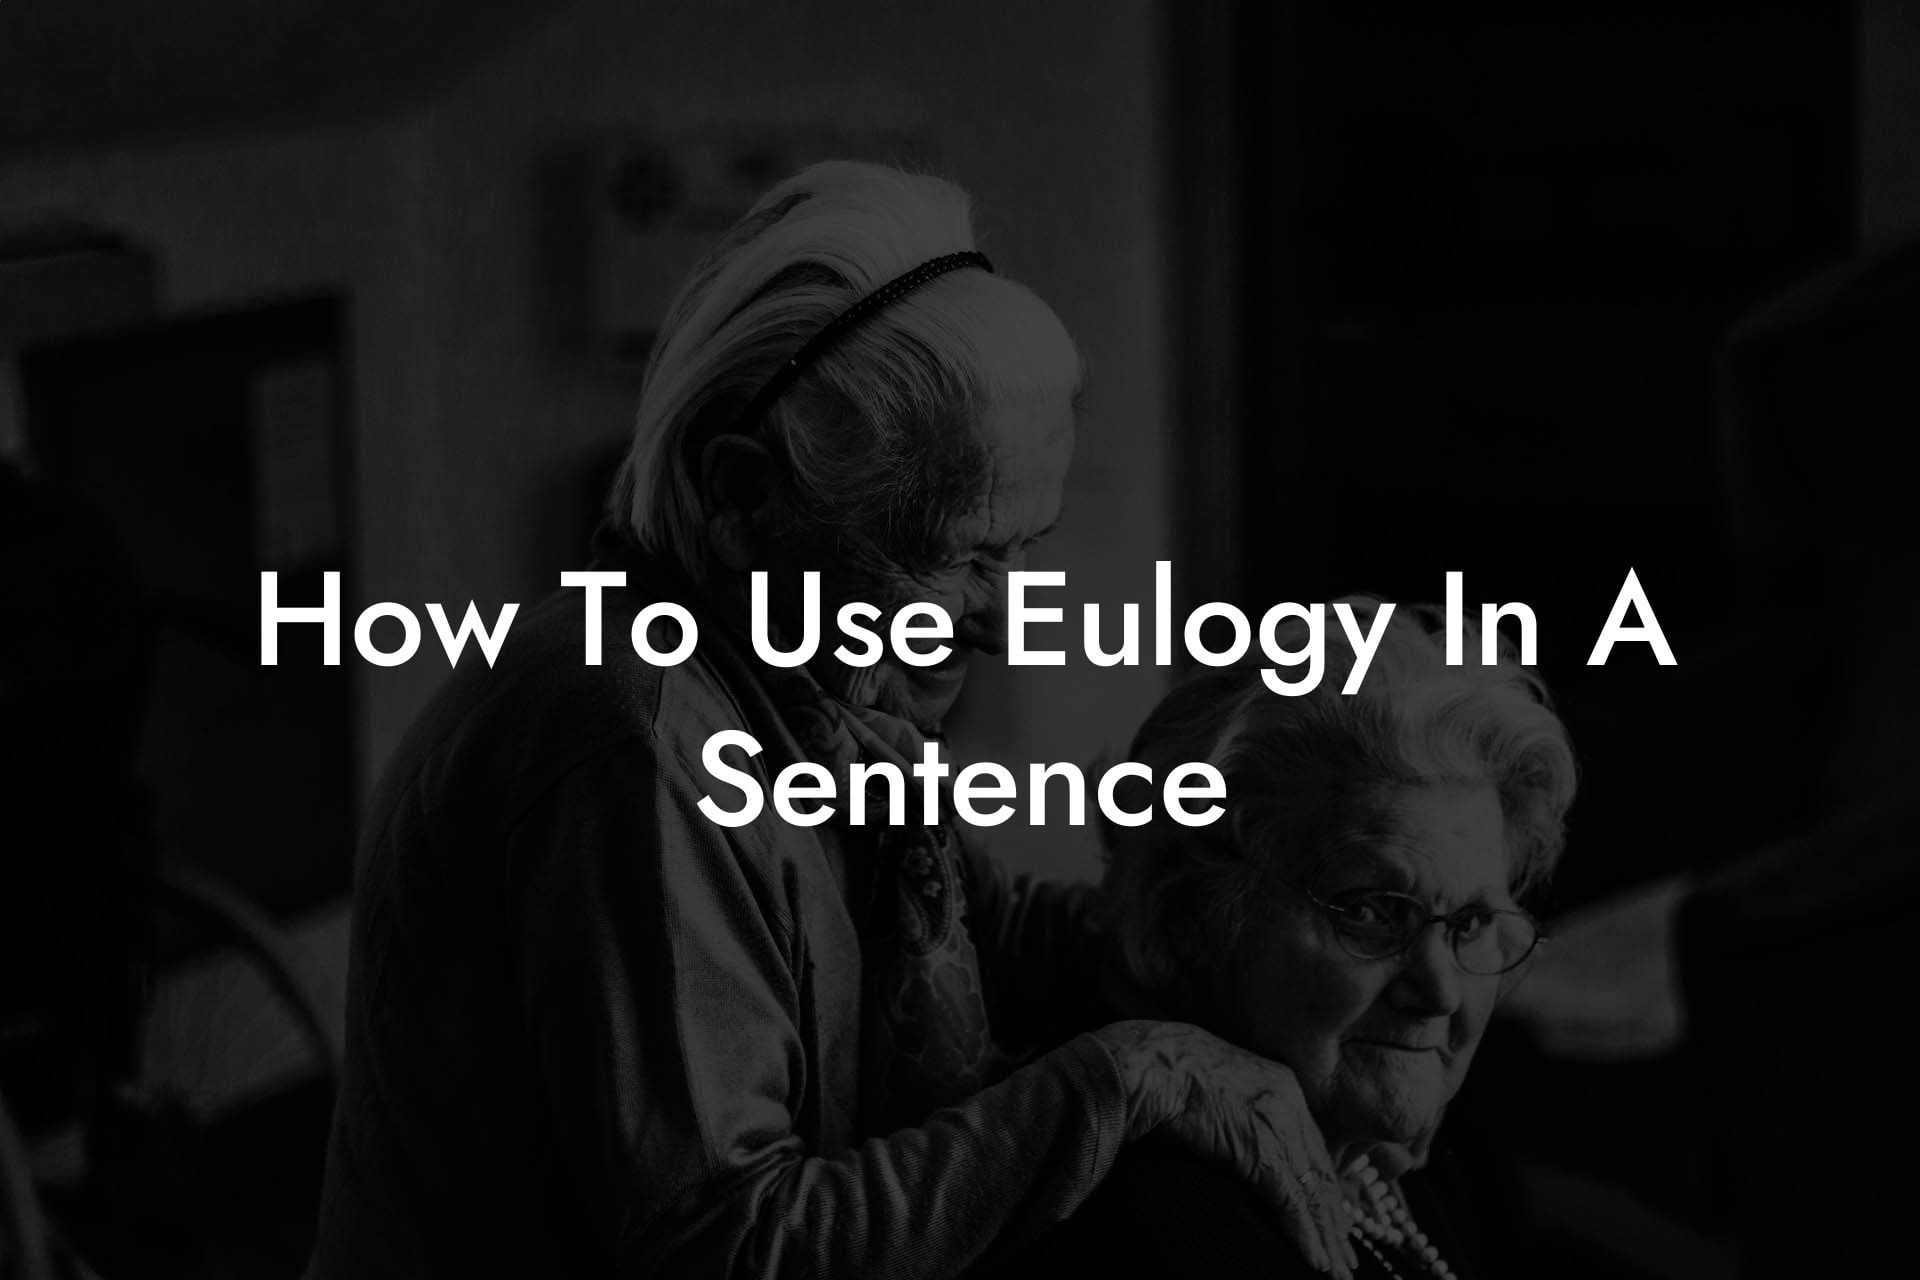 How To Use Eulogy In A Sentence